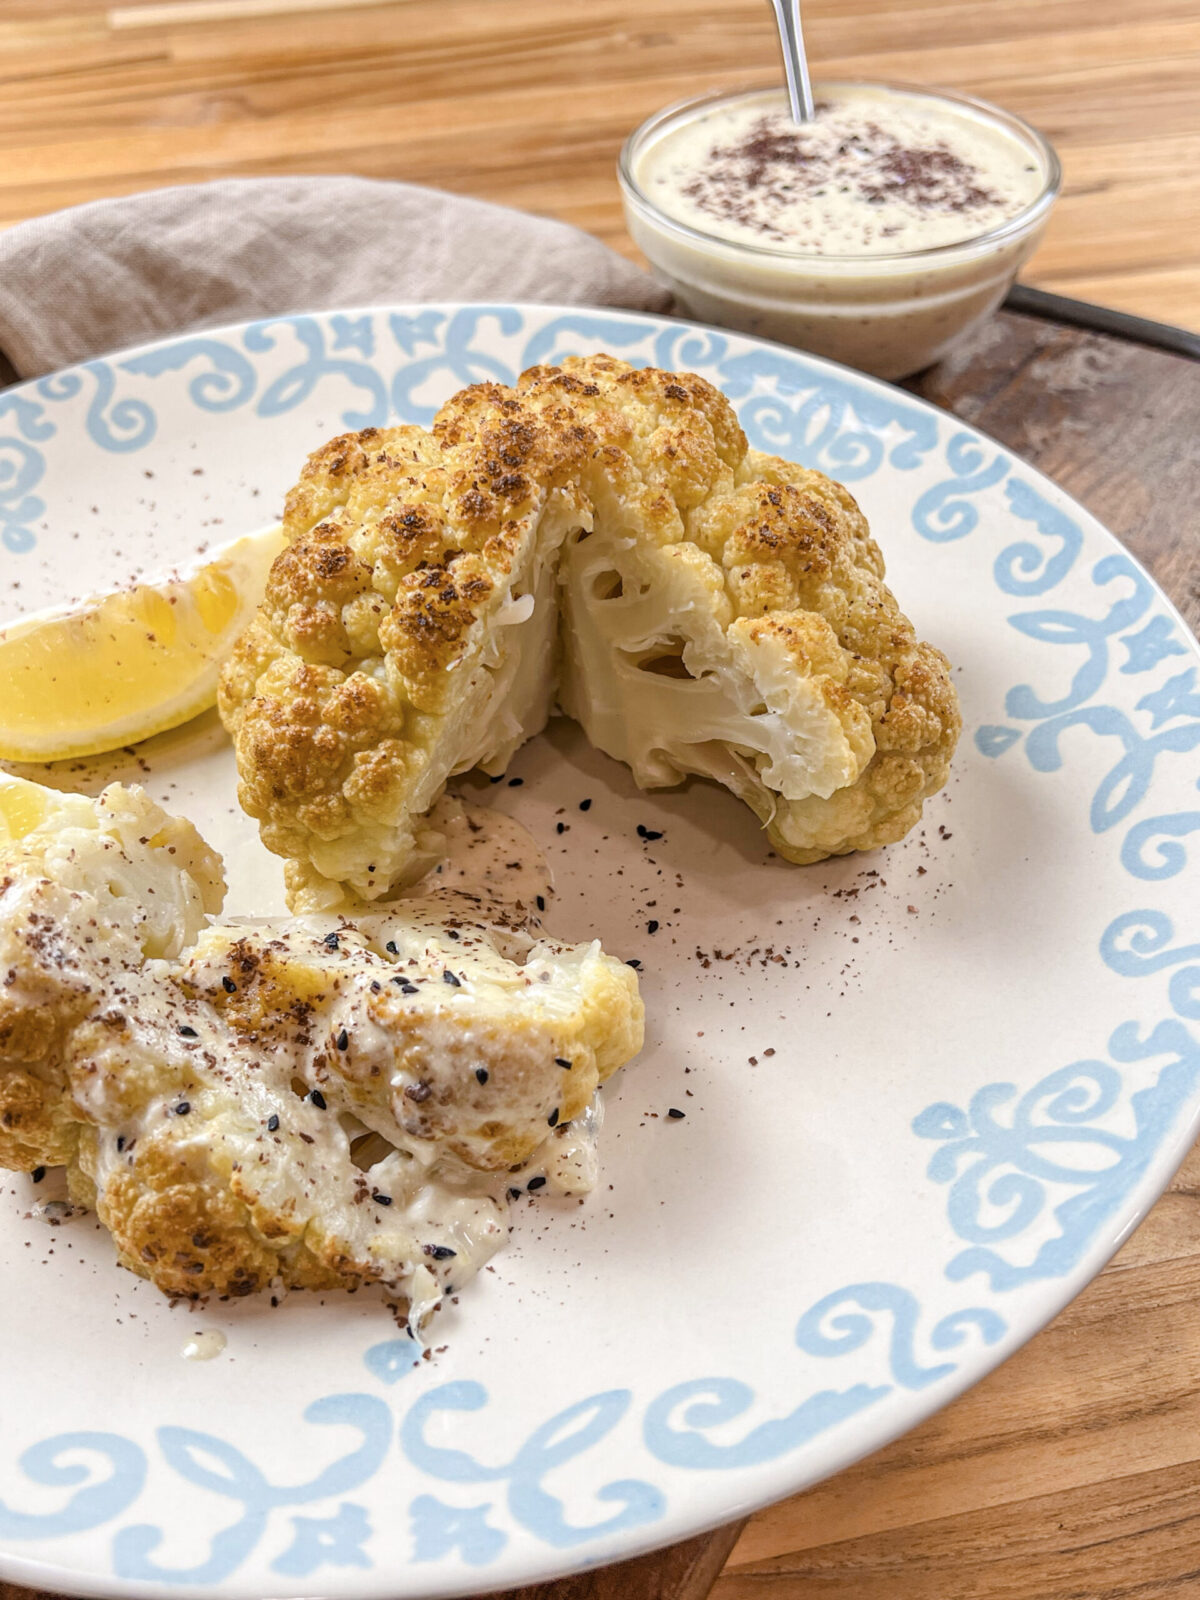 Golden-brown whole roasted cauliflower served with creamy tahini feta sauce, garnished with sumac and nigella seeds.